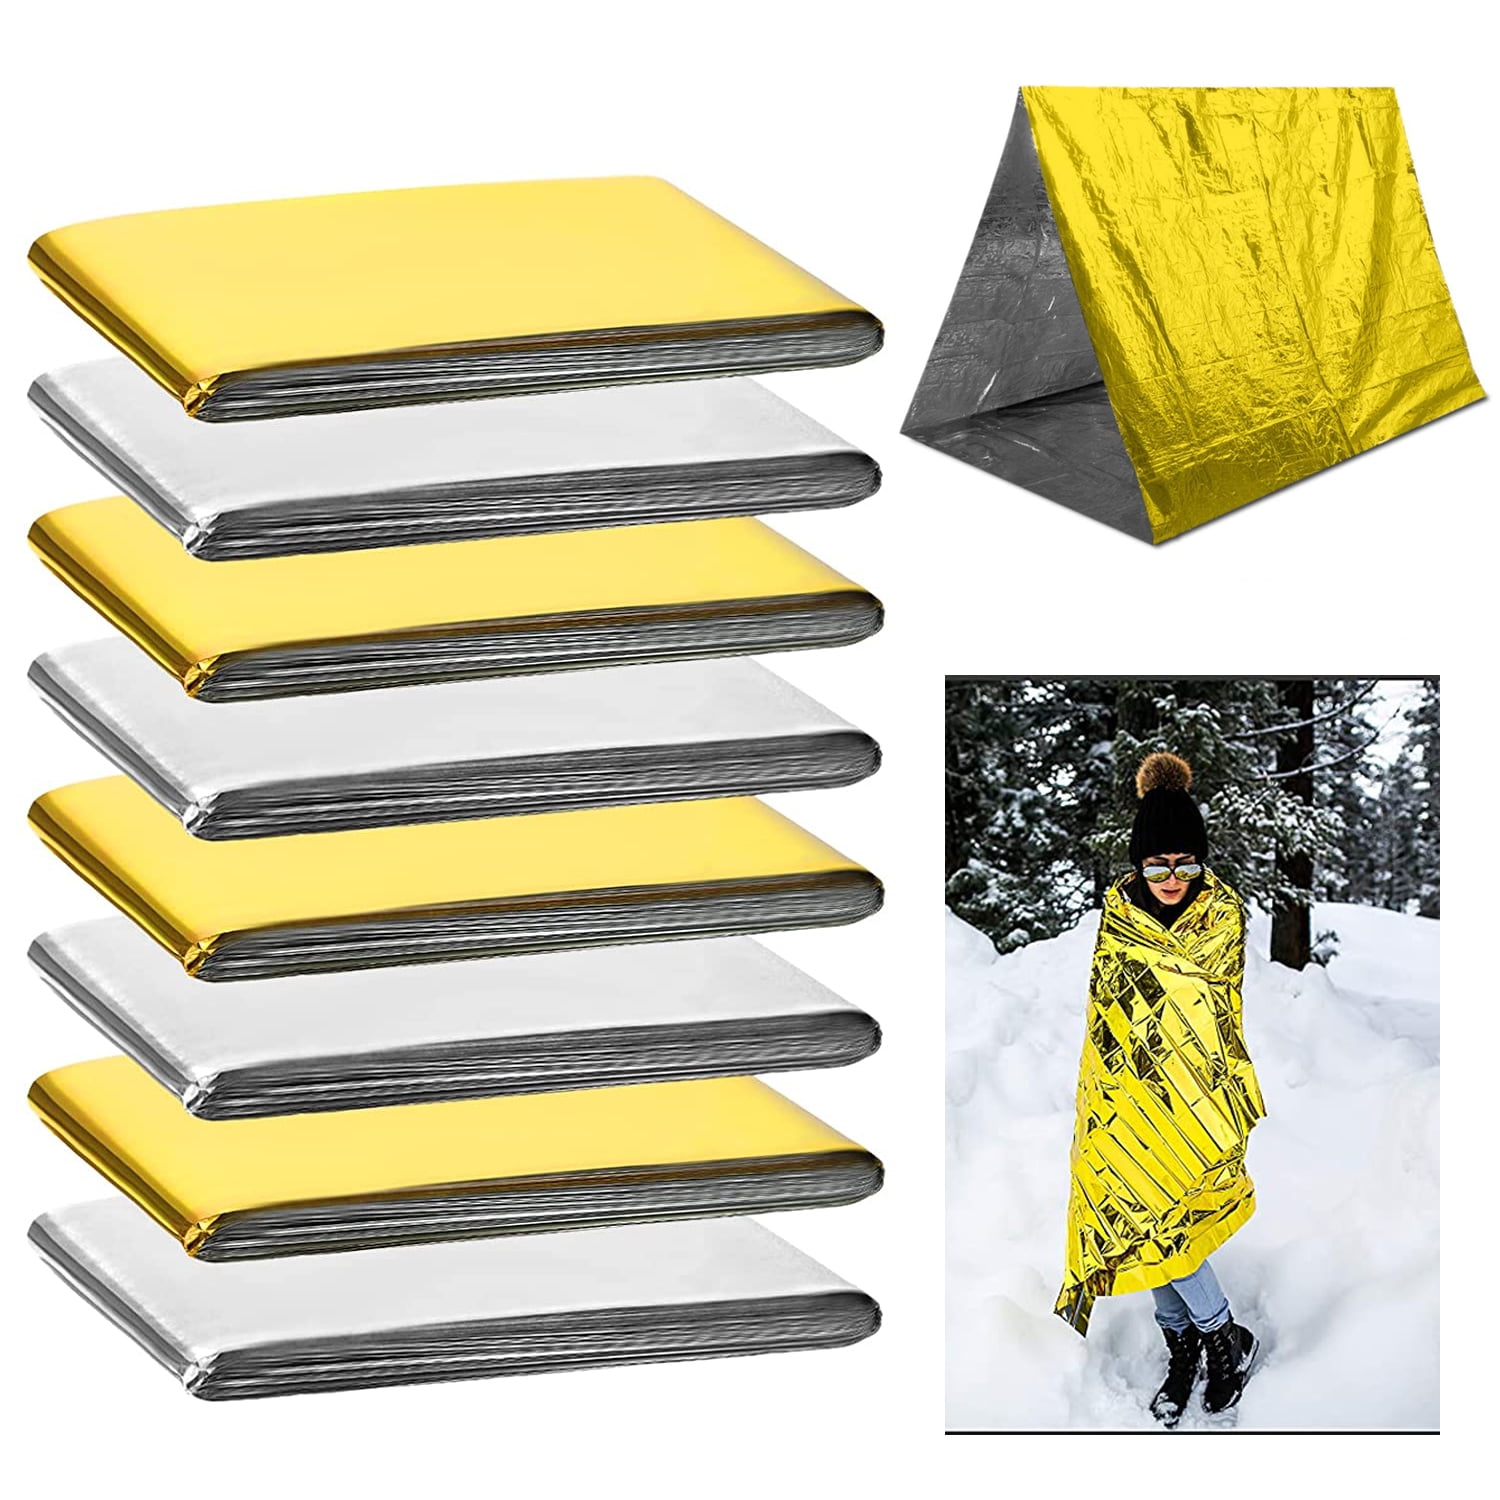 Emergency Zone HeatSaver Survival Blanket Inflatable Design for Maximum  Insulation and Heat Retention | 1 Pack